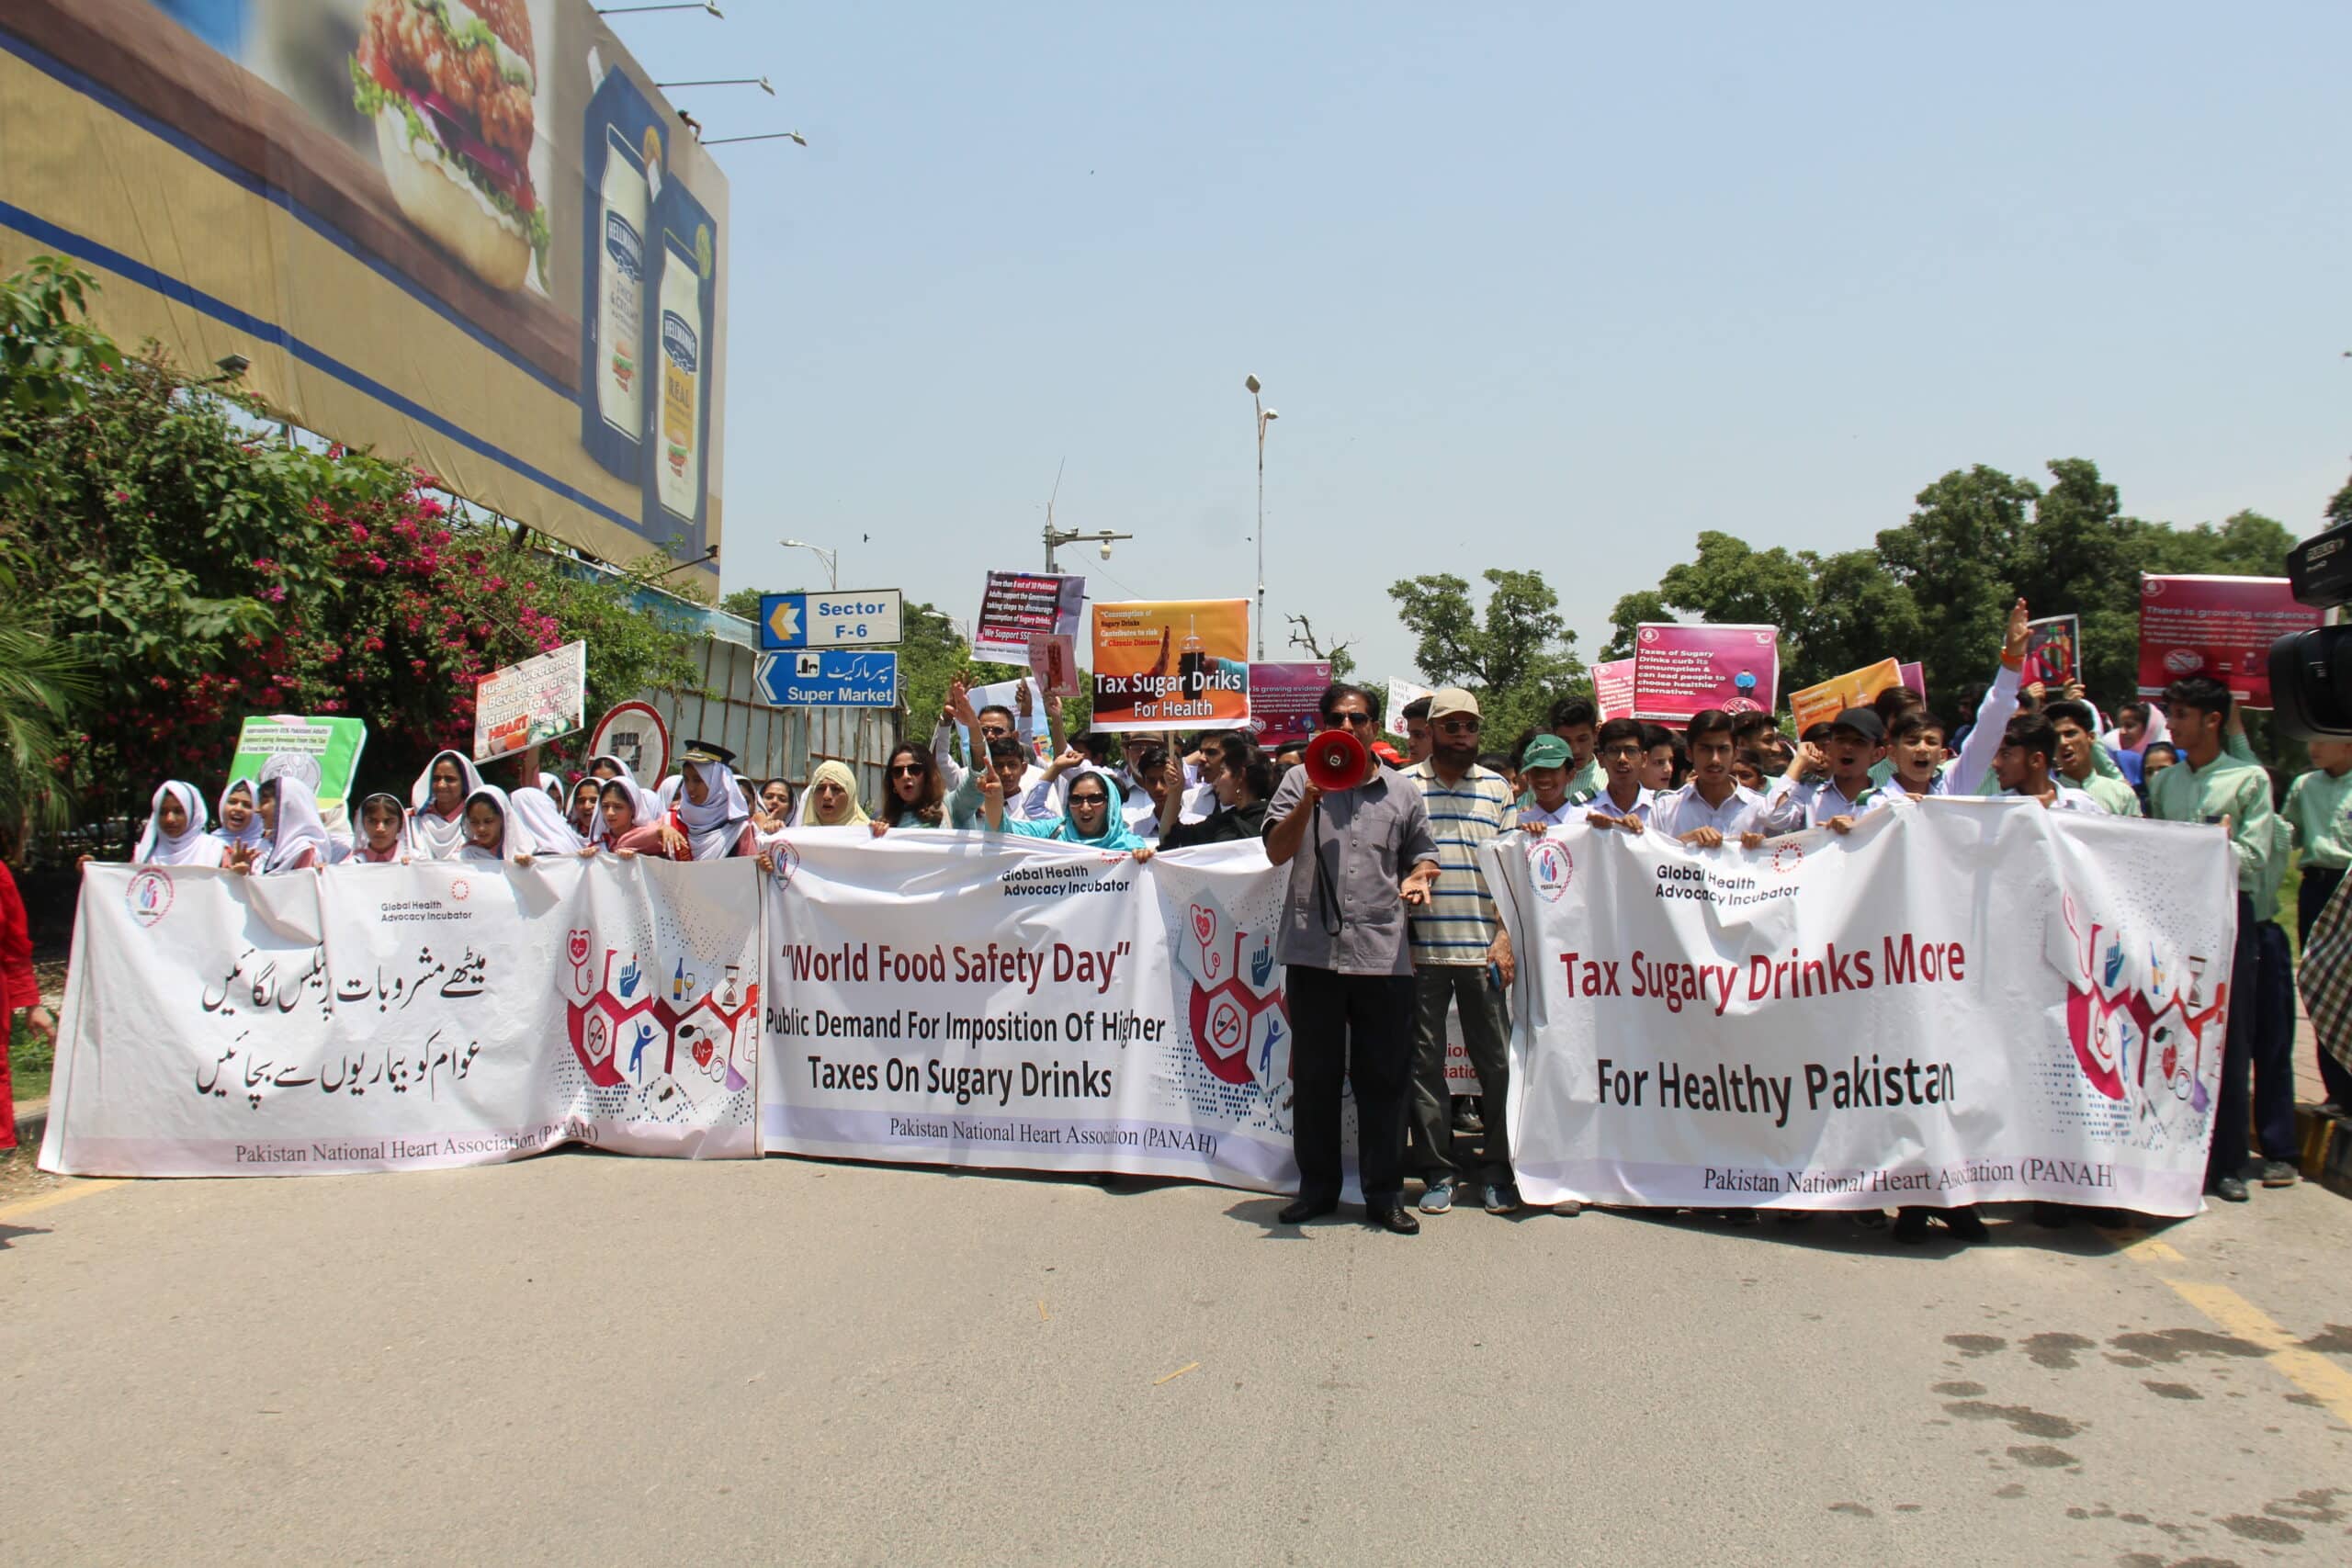 Panah Organized an Anti Sugrary walk on  World Food Safety Day”  Public Demand For imposition  Of higher Tax  On Sugary Drinks